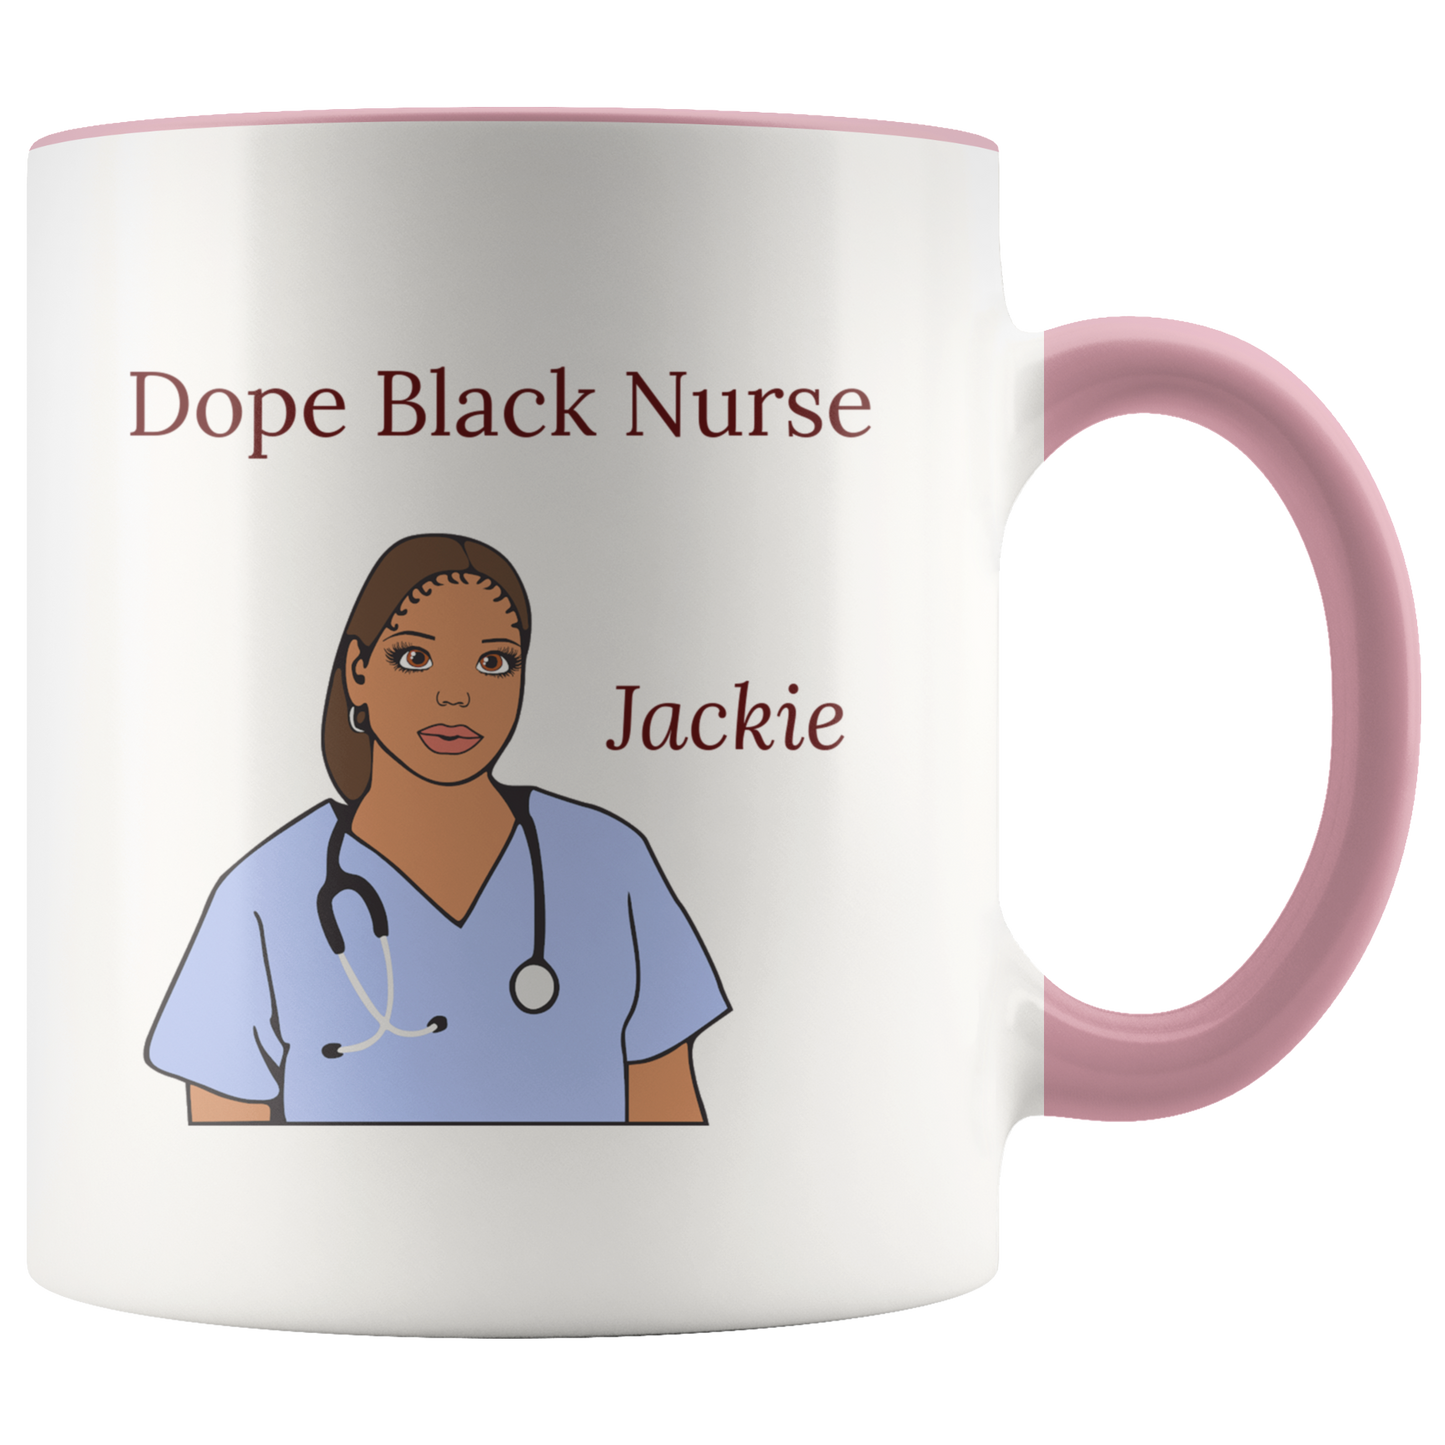 Dope Black Nuse, Coffee Mug, Nurse Gift, Coffee Gift, Black Excellence, Personalized Gift, Graduation